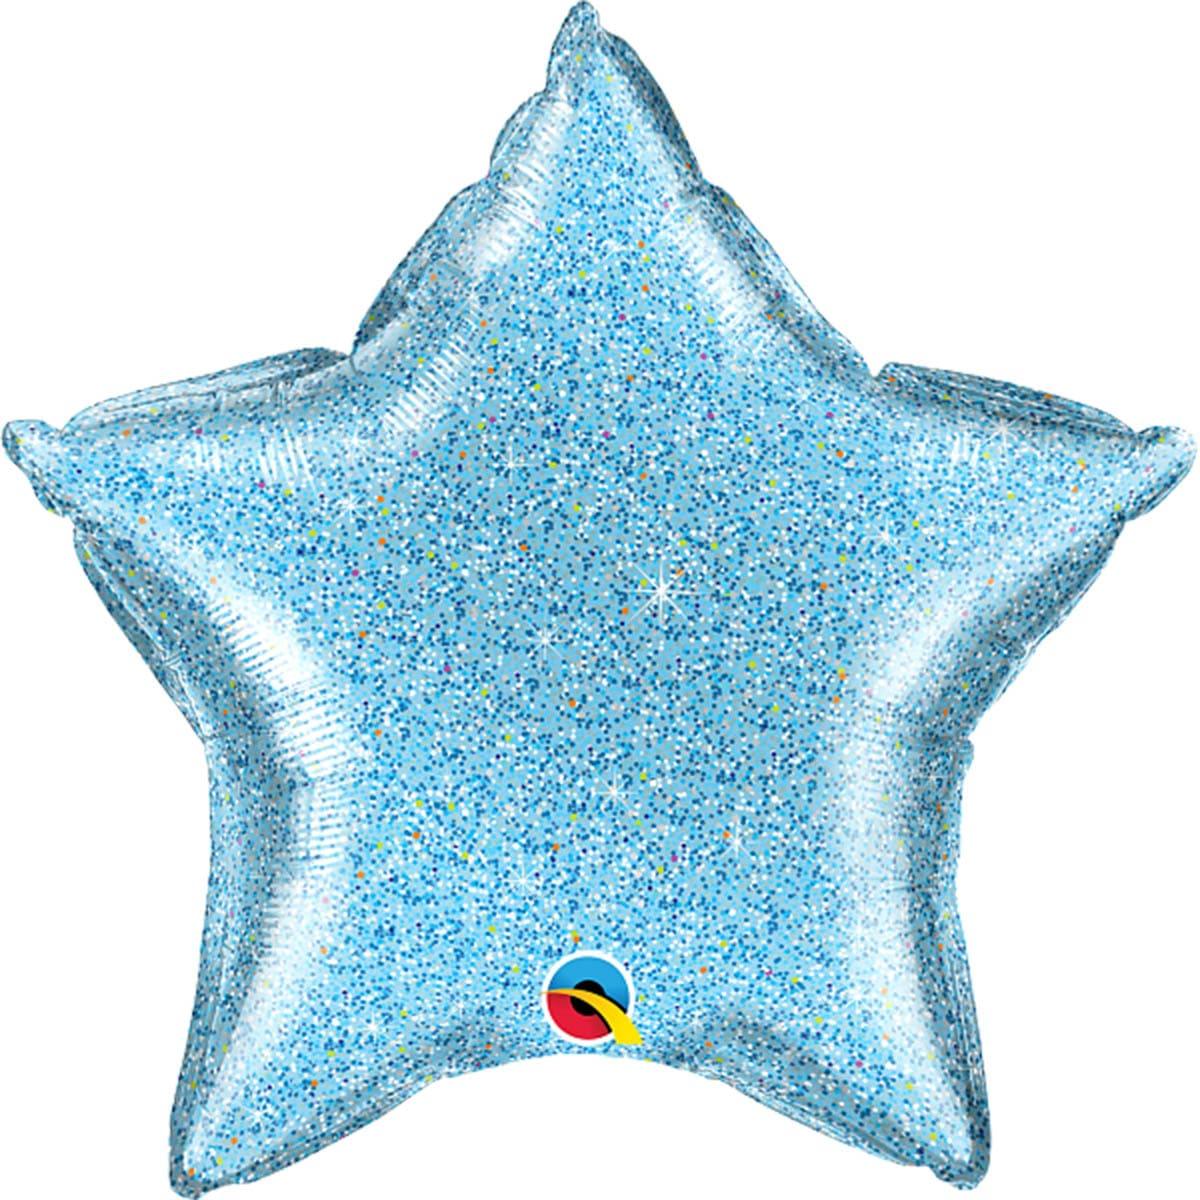 LE GROUPE BLC INTL INC Balloons Glittergraphic Blue Star Foil Balloon, 20 in